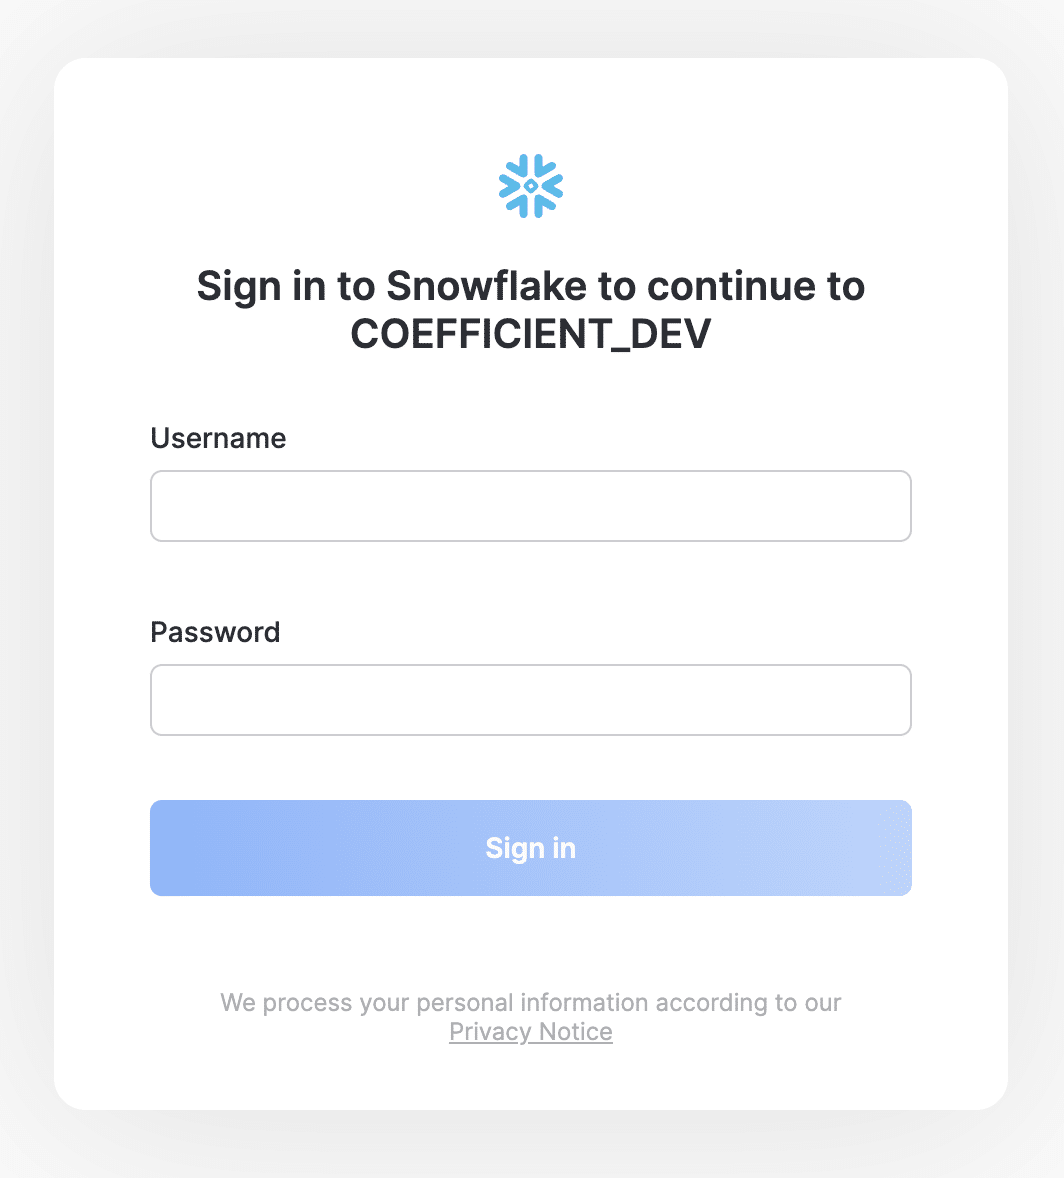 Snowflake Sign-in for Coefficient Excel Add-in